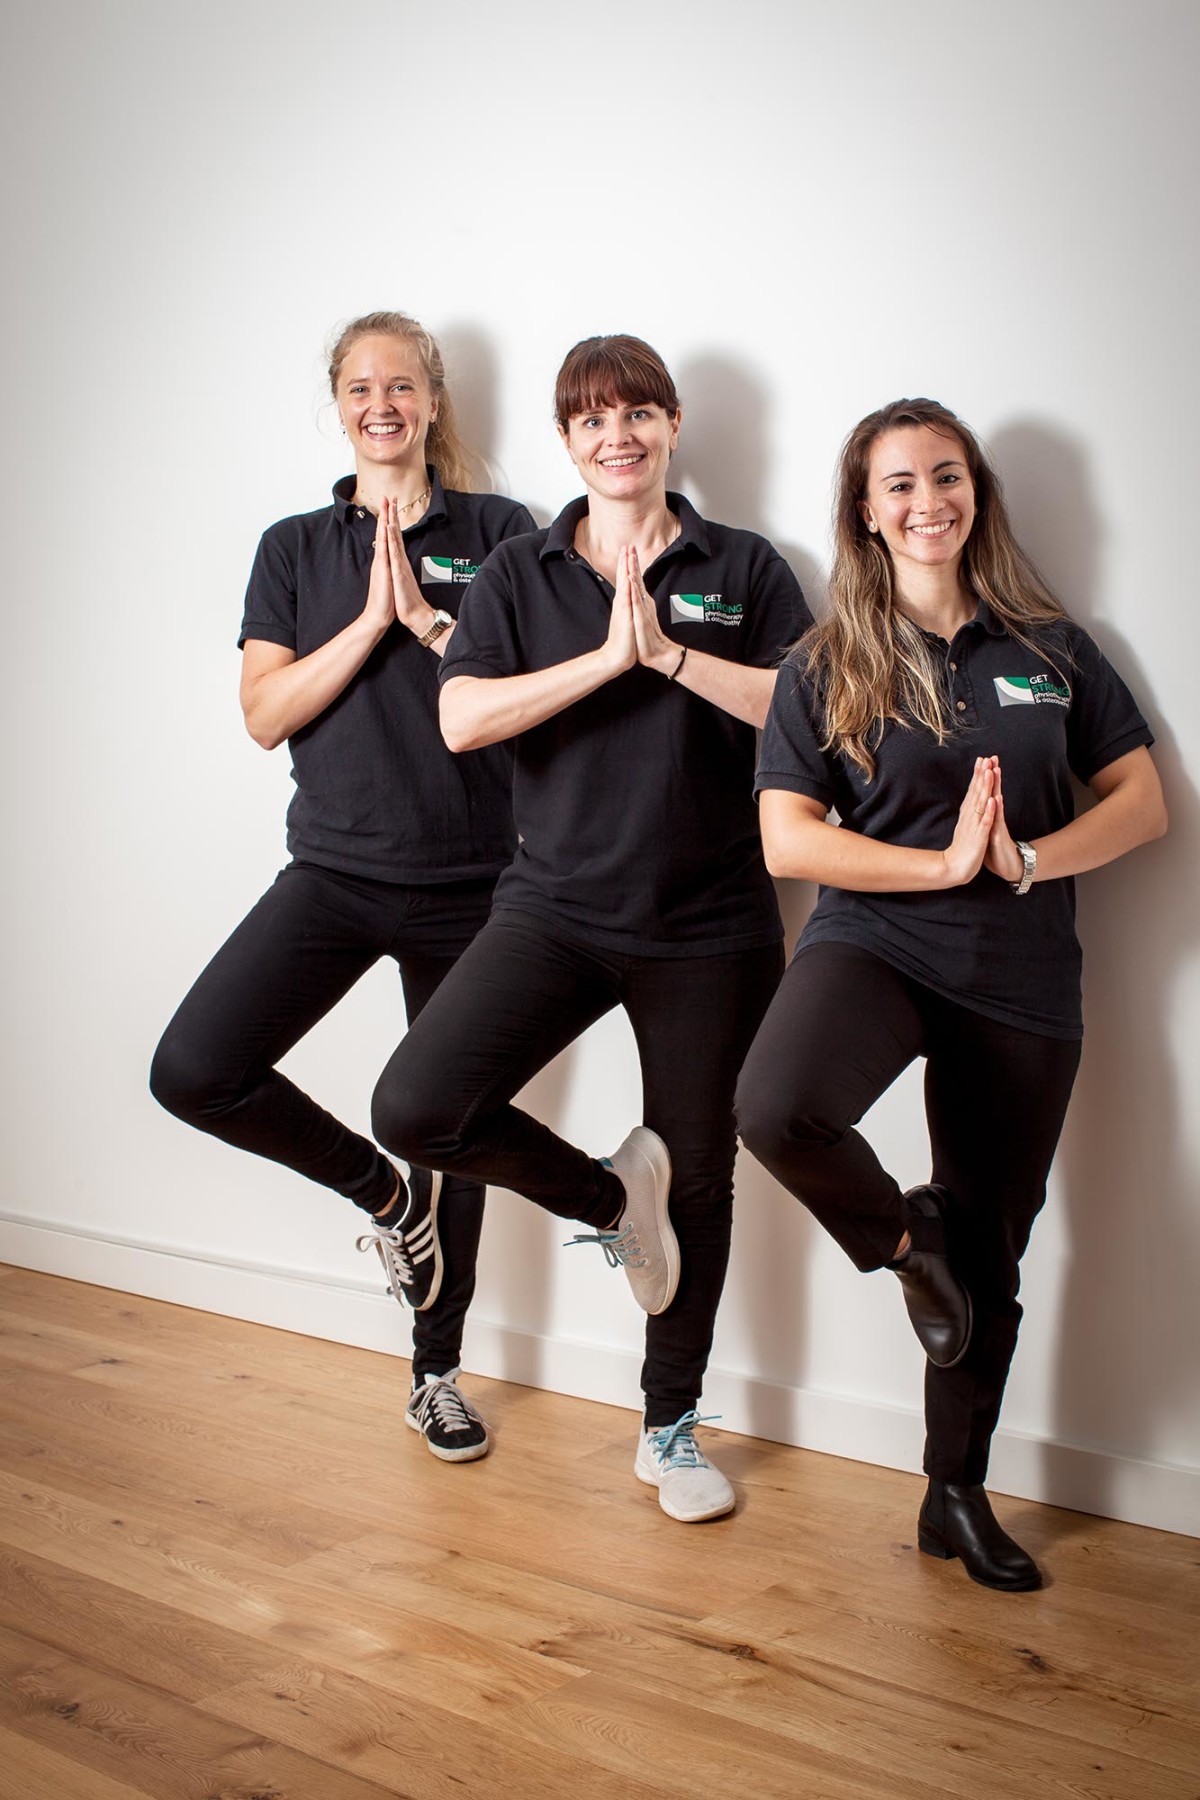 Behind the scenes photo shoot, the team at Get Strong physiotherapy & osteopathy